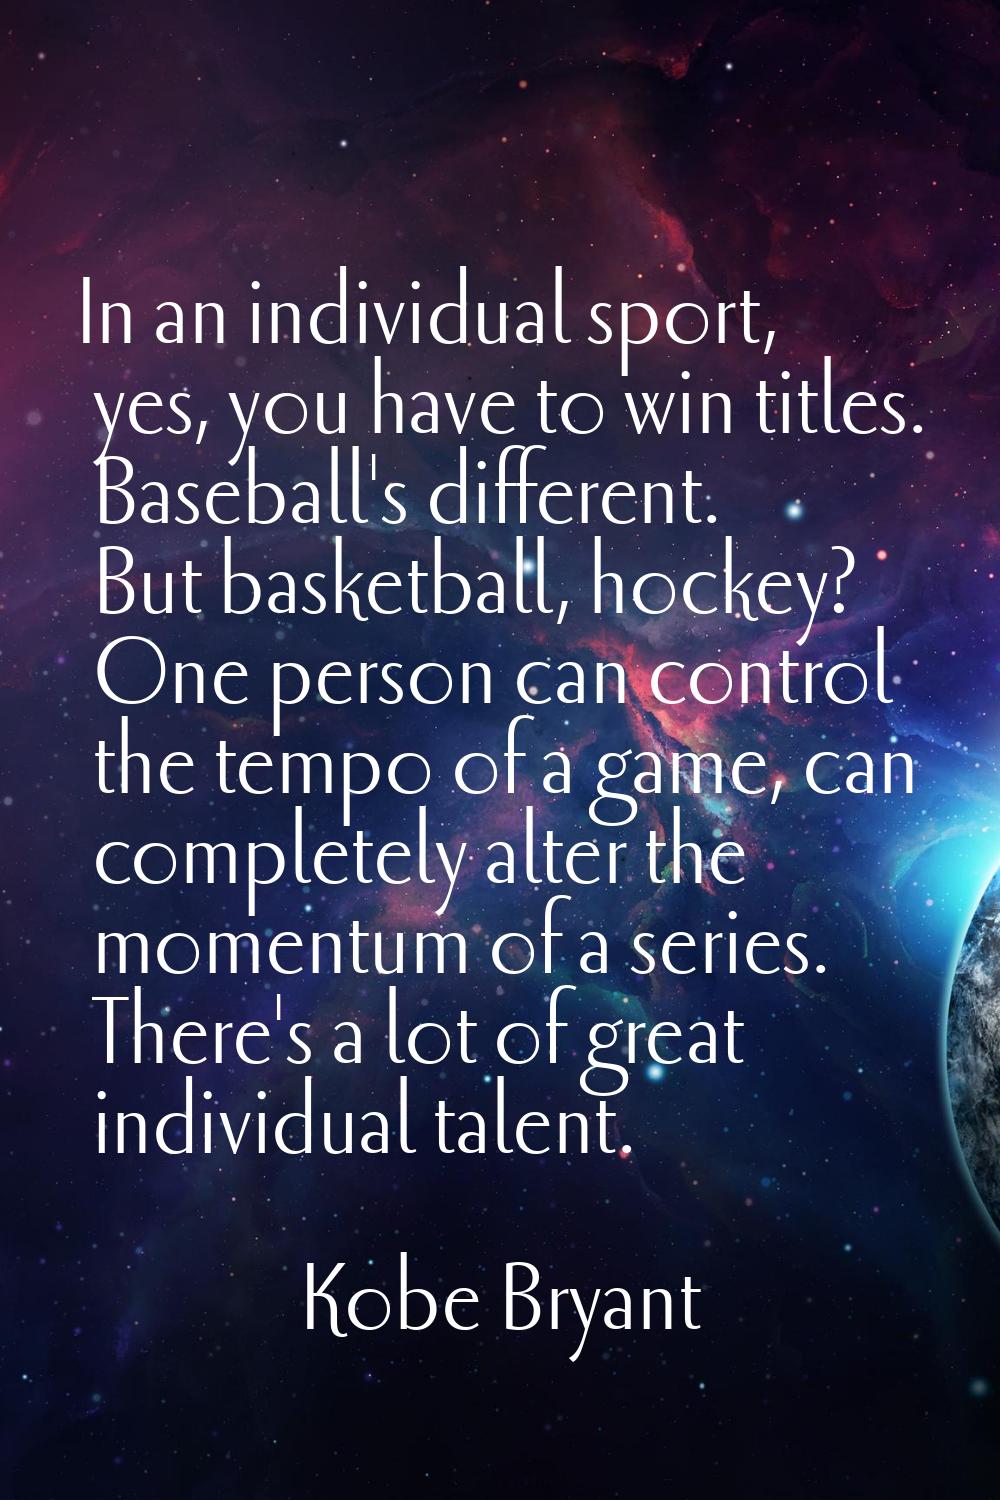 In an individual sport, yes, you have to win titles. Baseball's different. But basketball, hockey? 